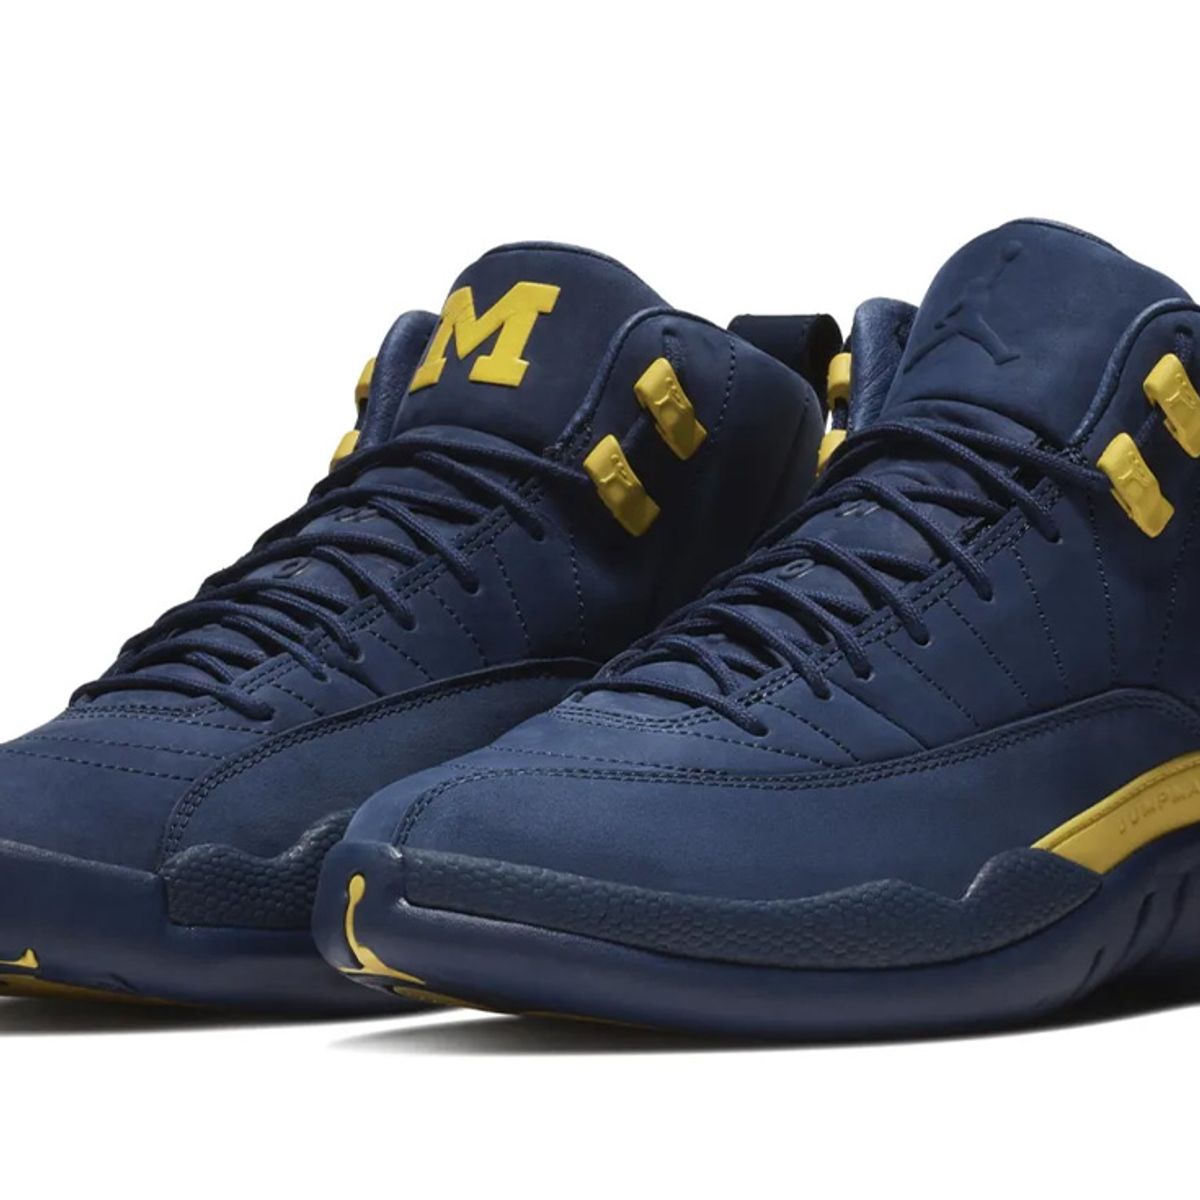 Corral: Go Blue! Our Favourite Michigan-Themed Sneakers Sneaker Freaker